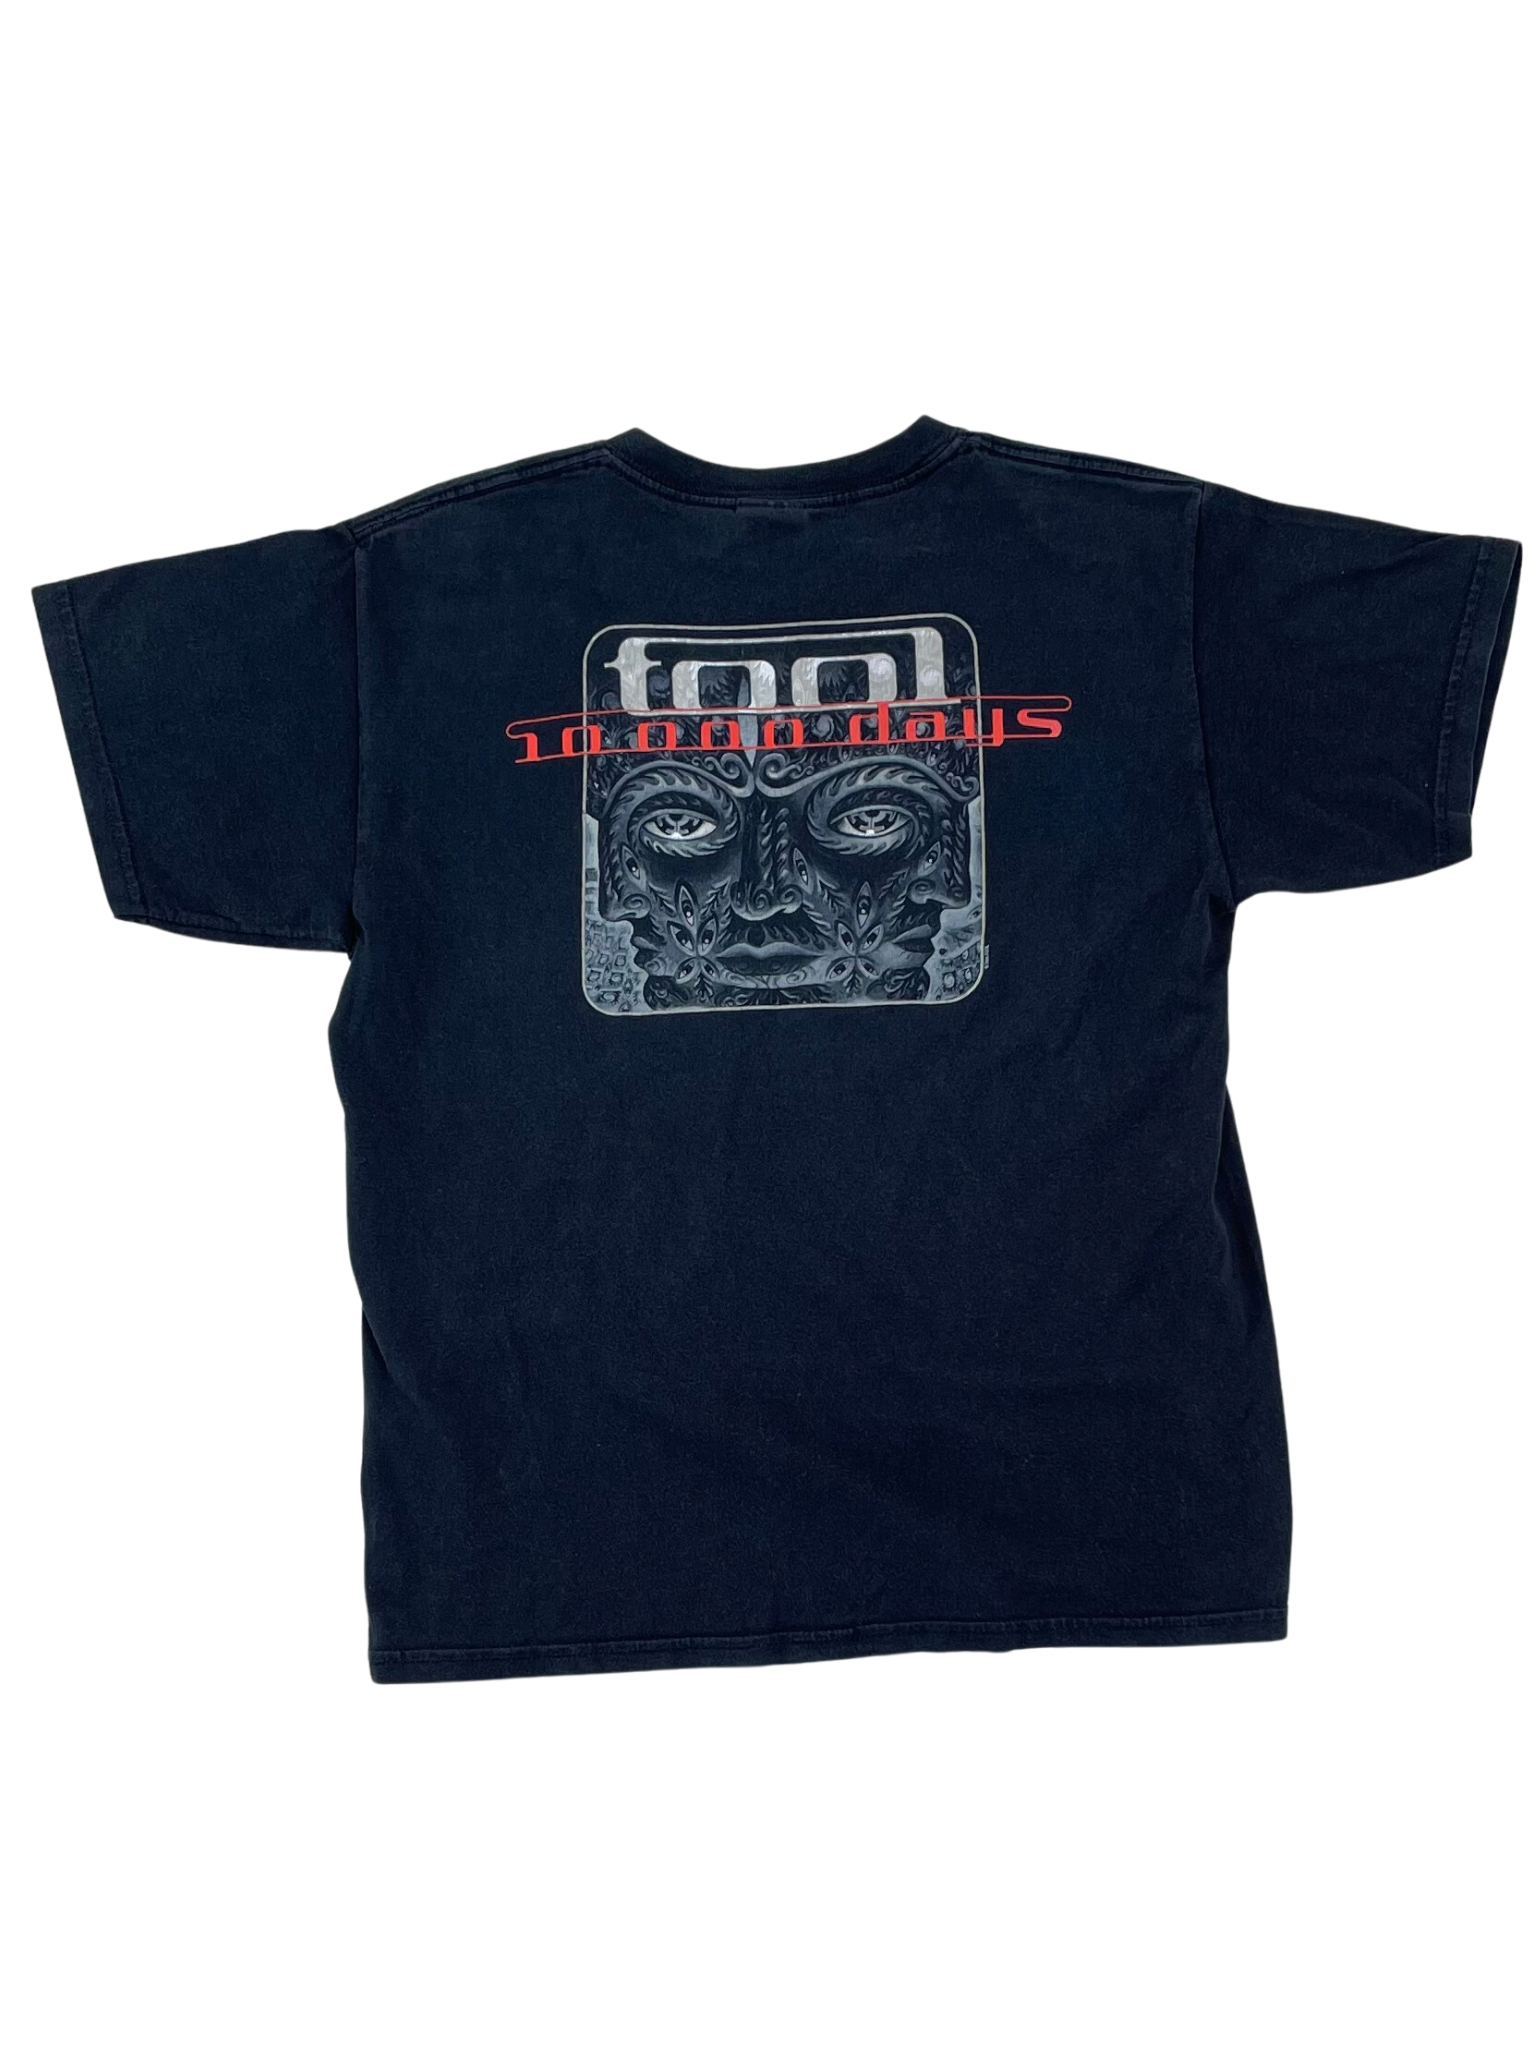 Tool band shirt from 2005